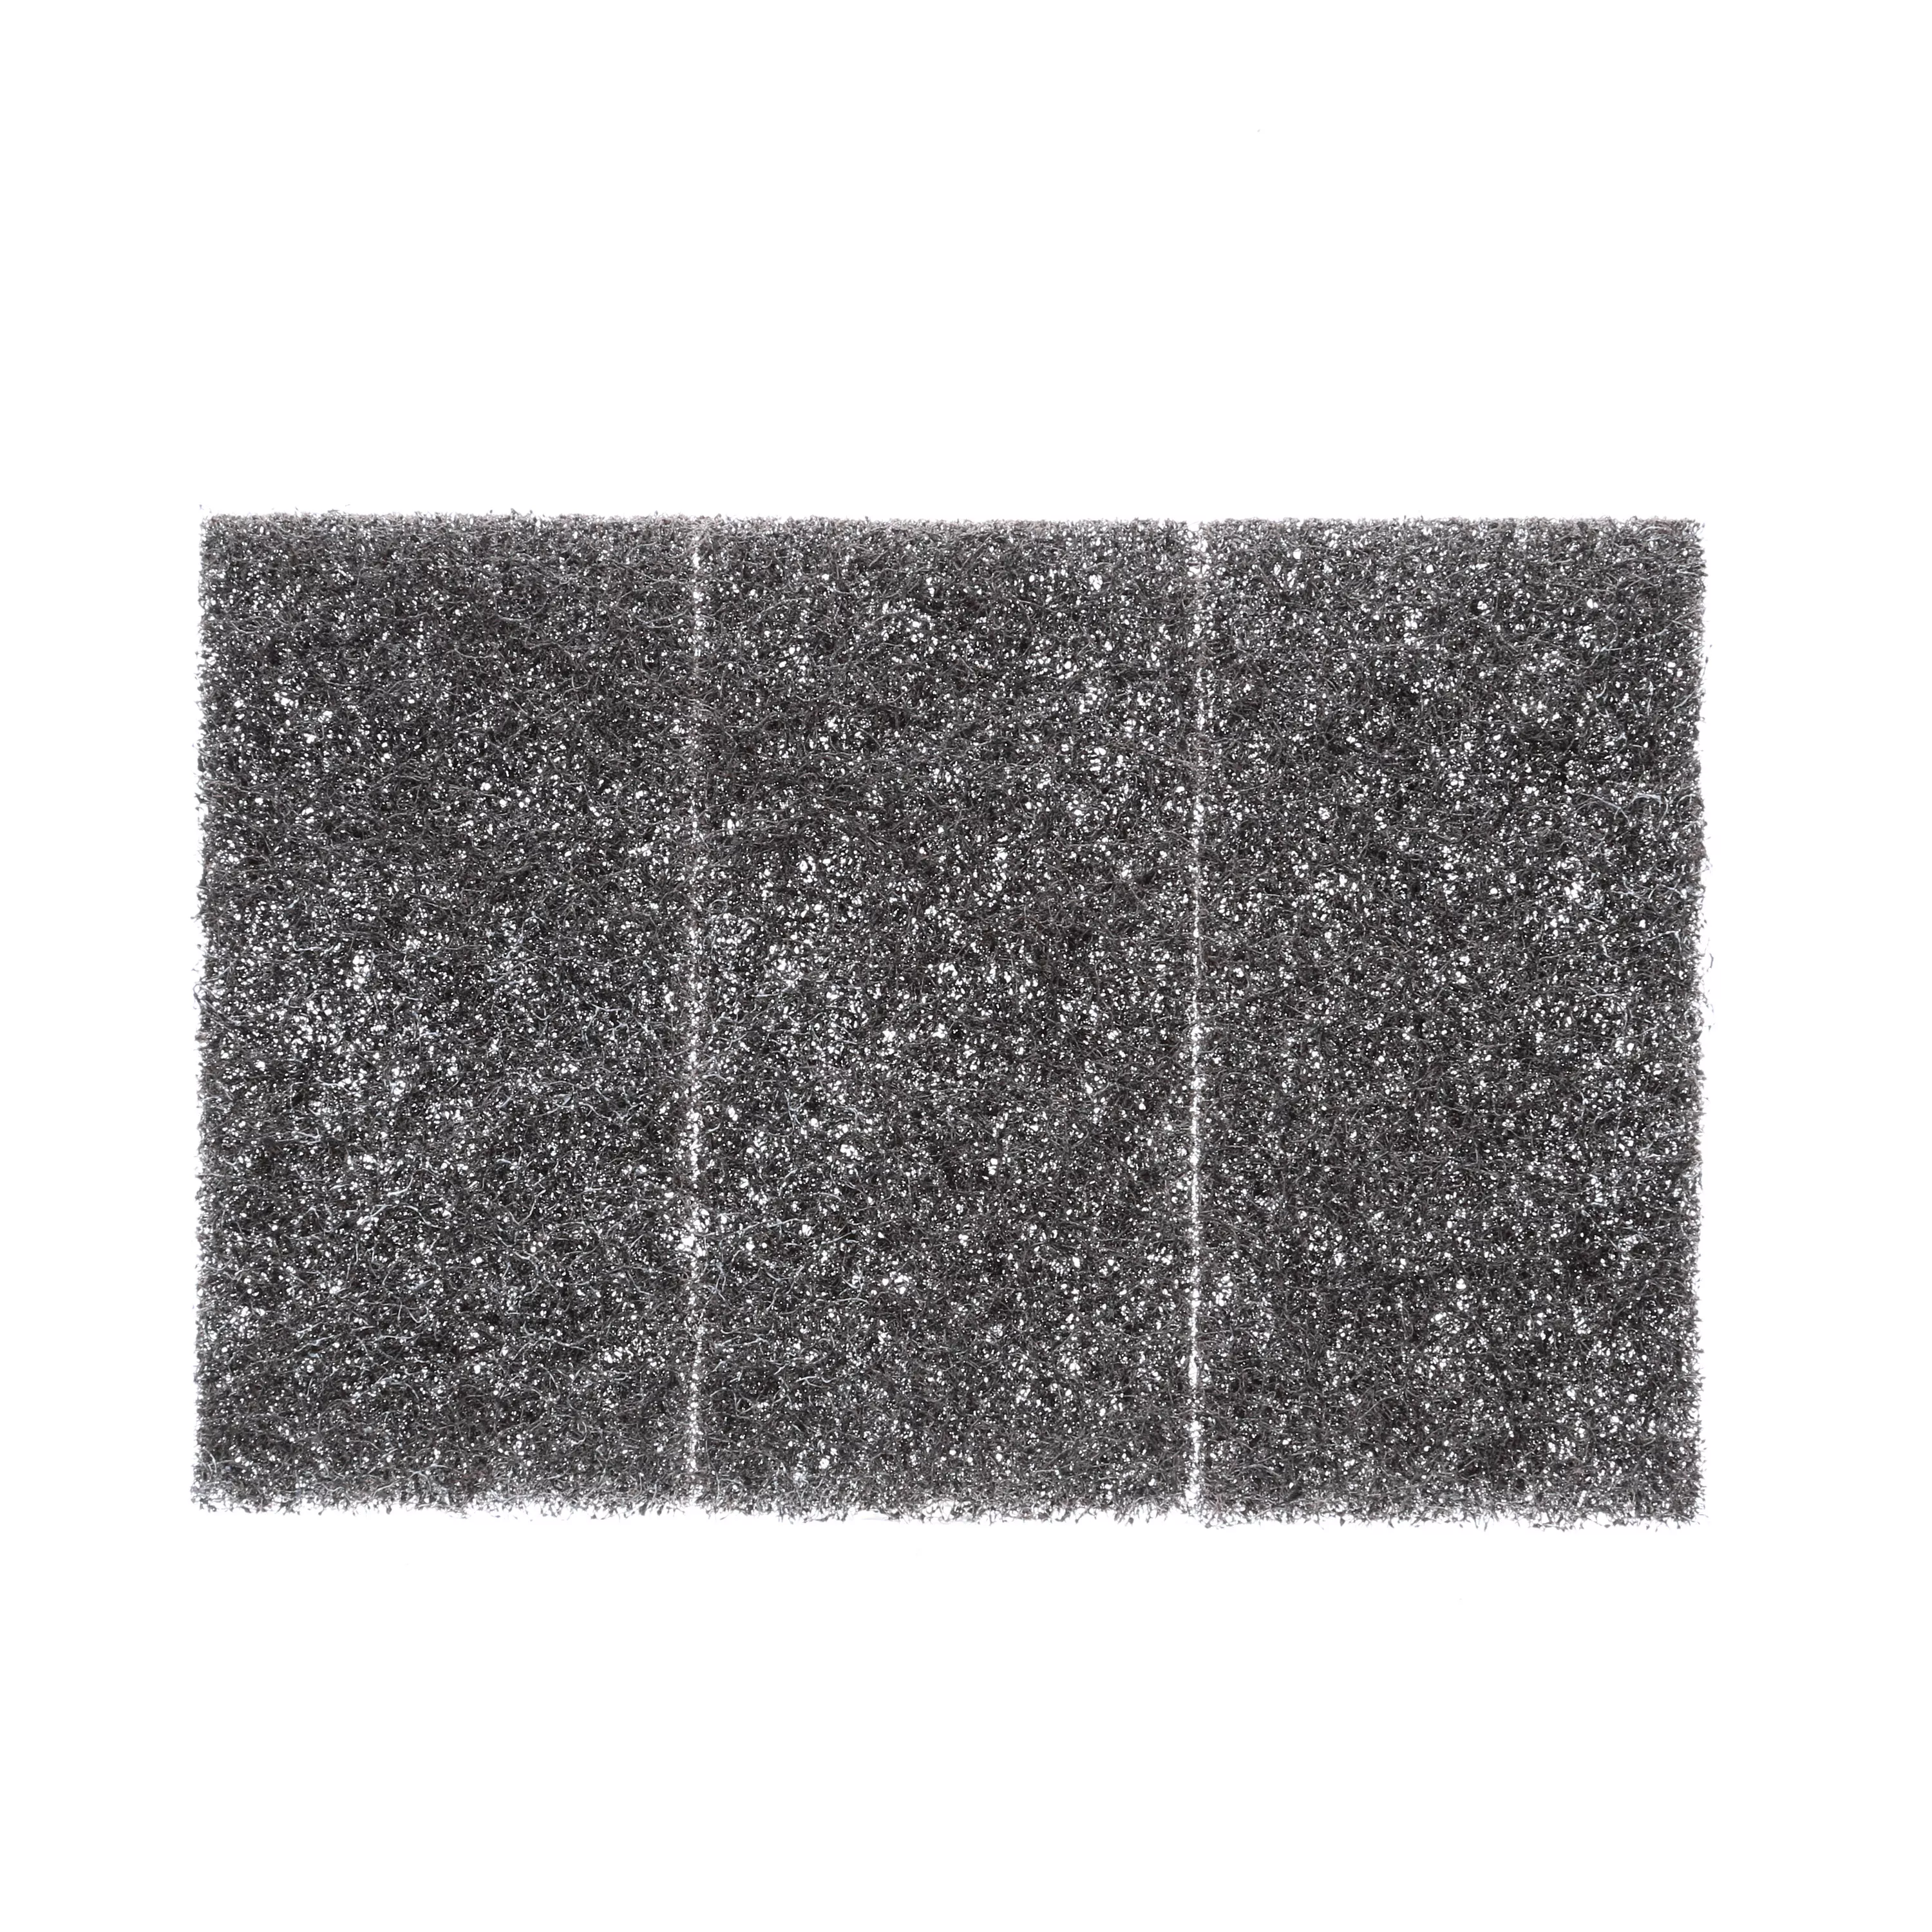 3M™ Synthetic Steel Wool Pads, 10116NA, #2 Medium, 2 in x 4 in